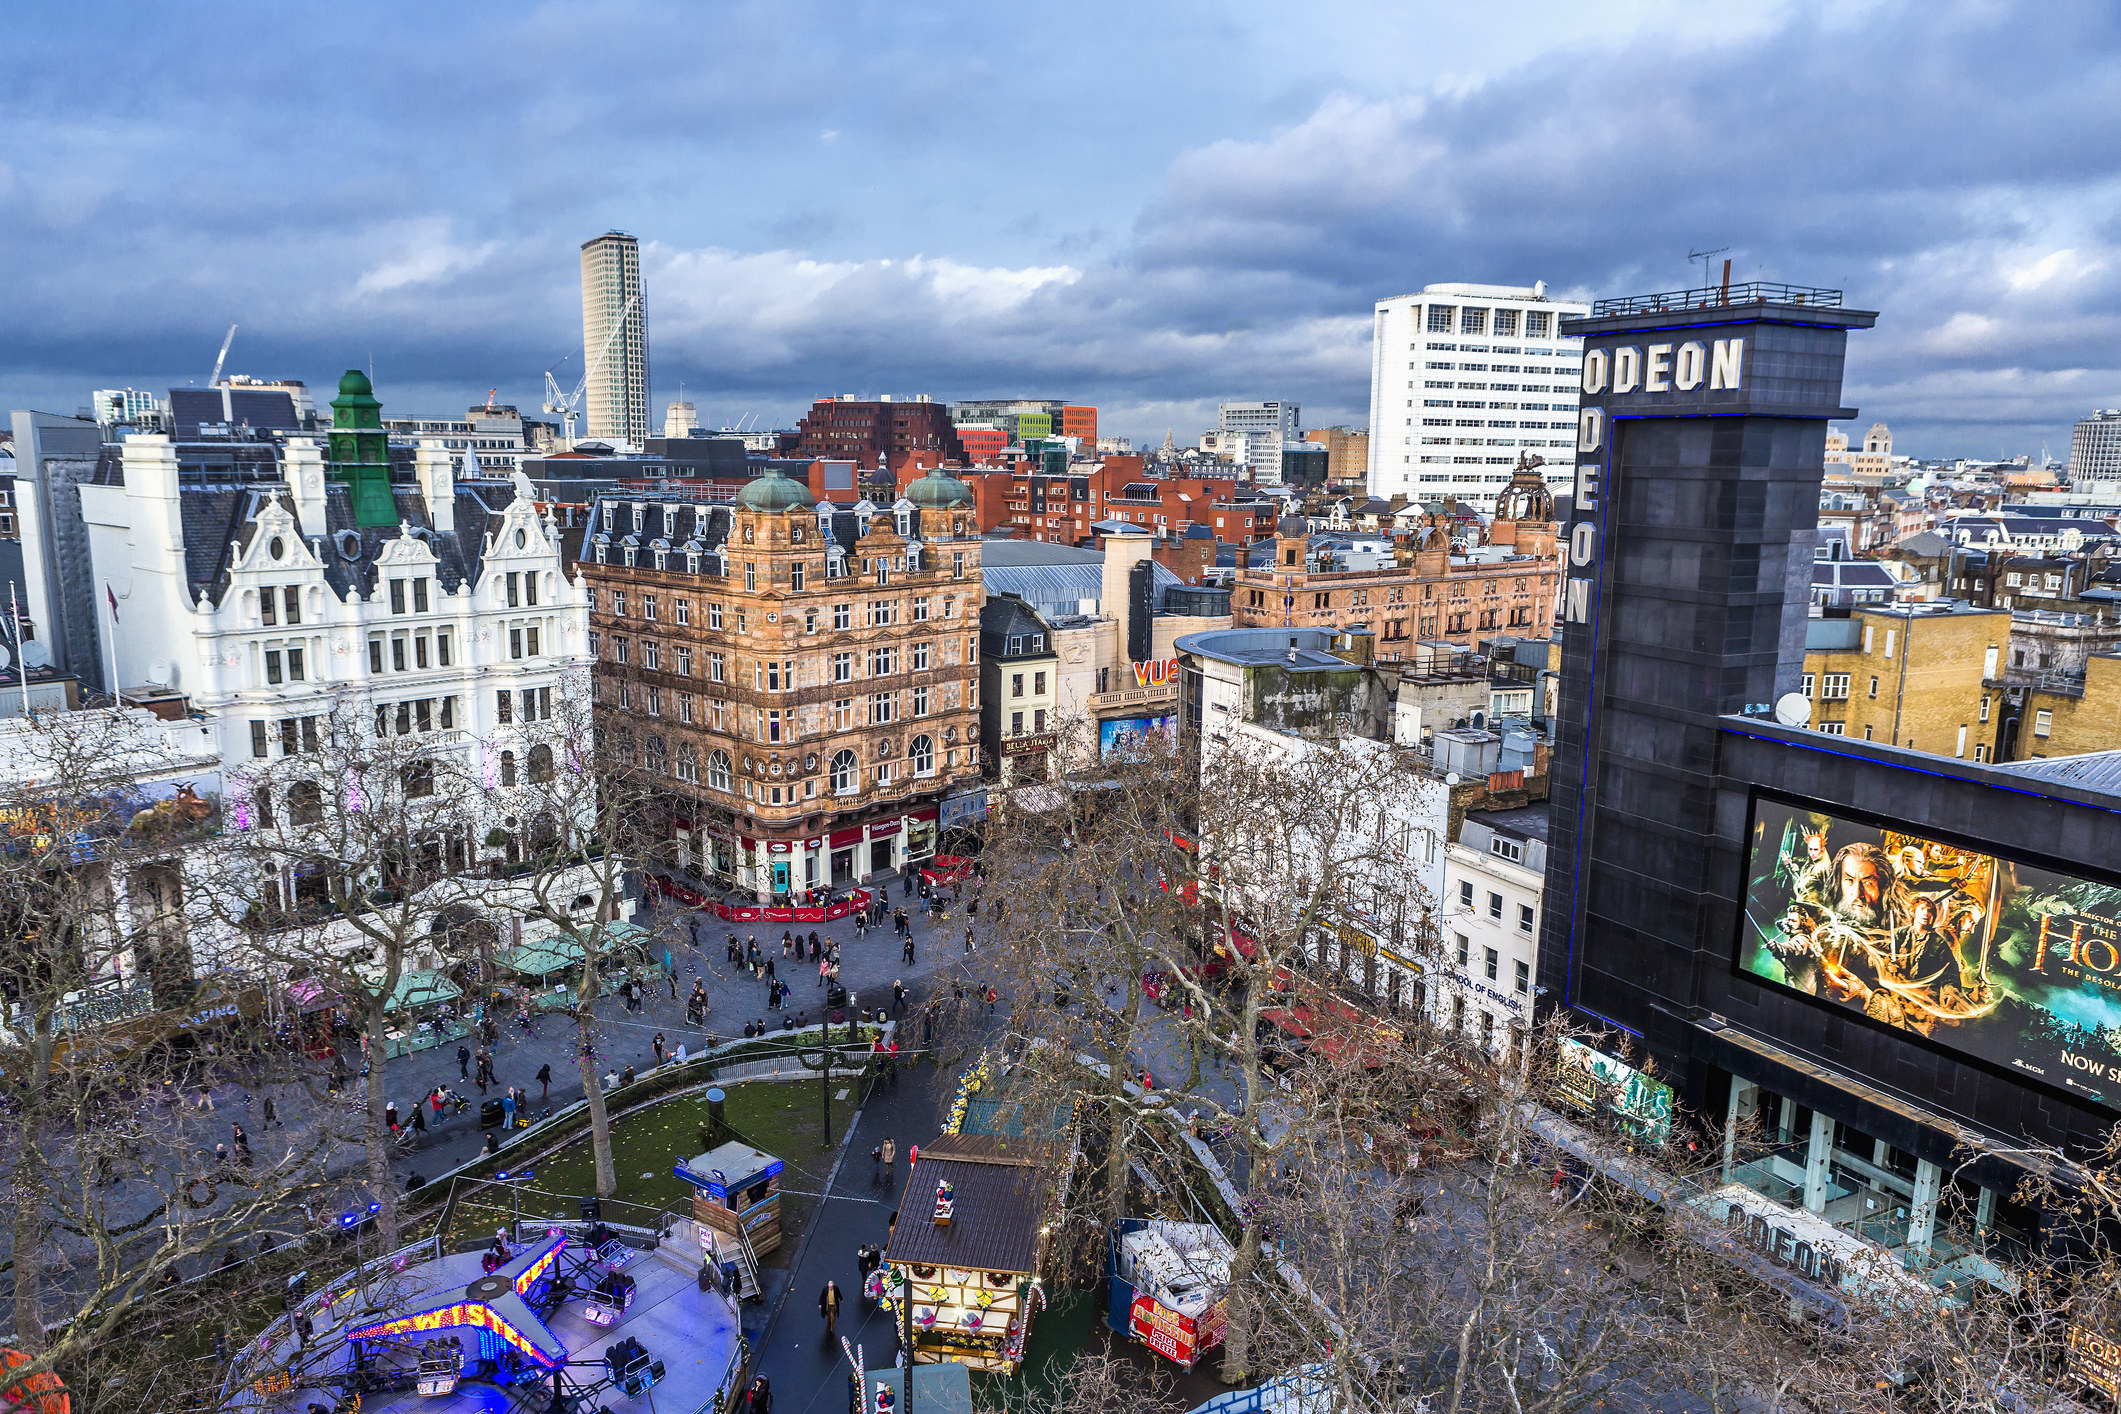 An aerial view of Leicester Square